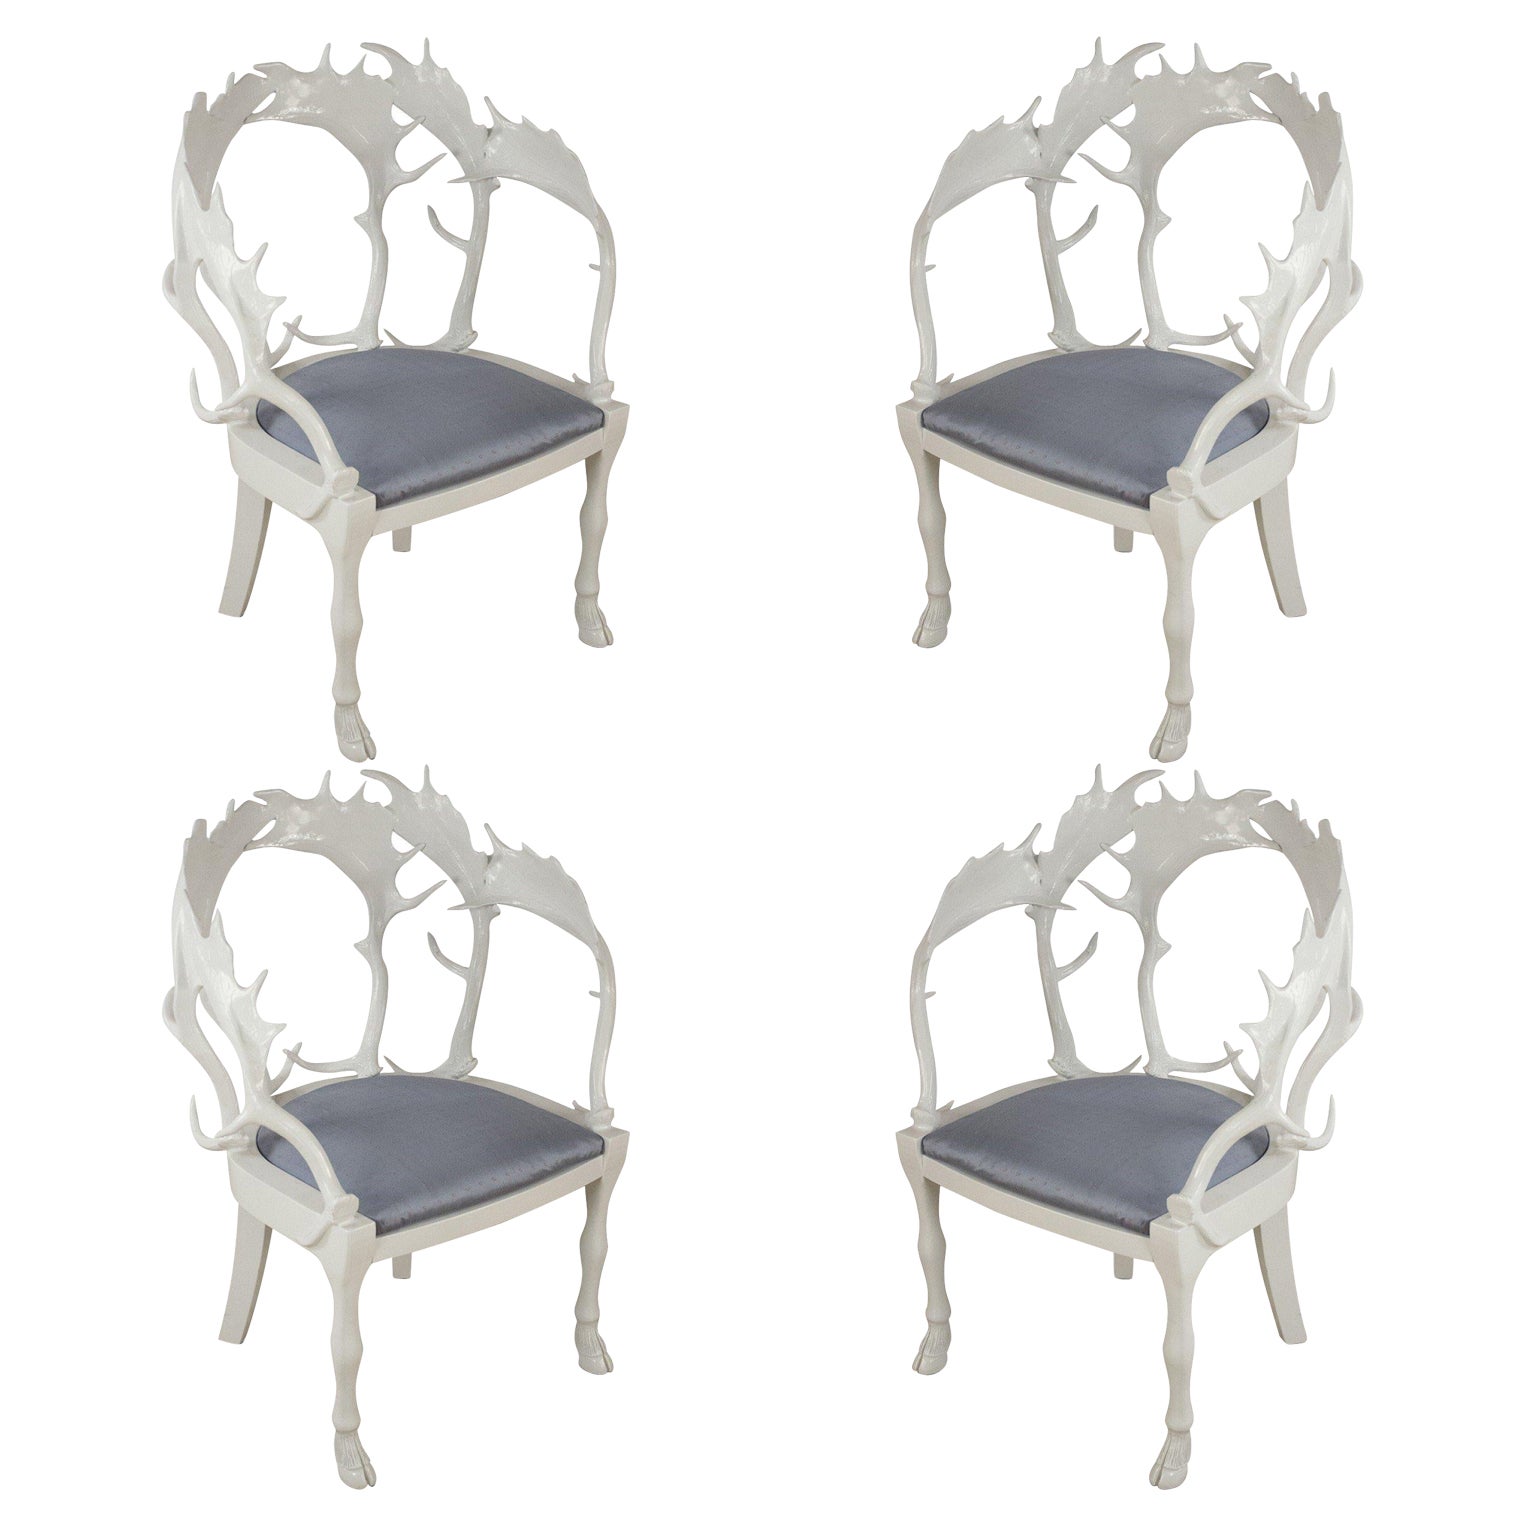 Set of 4 Redmile Post-Modern English White Lacquered Fantasy Horn Chairs